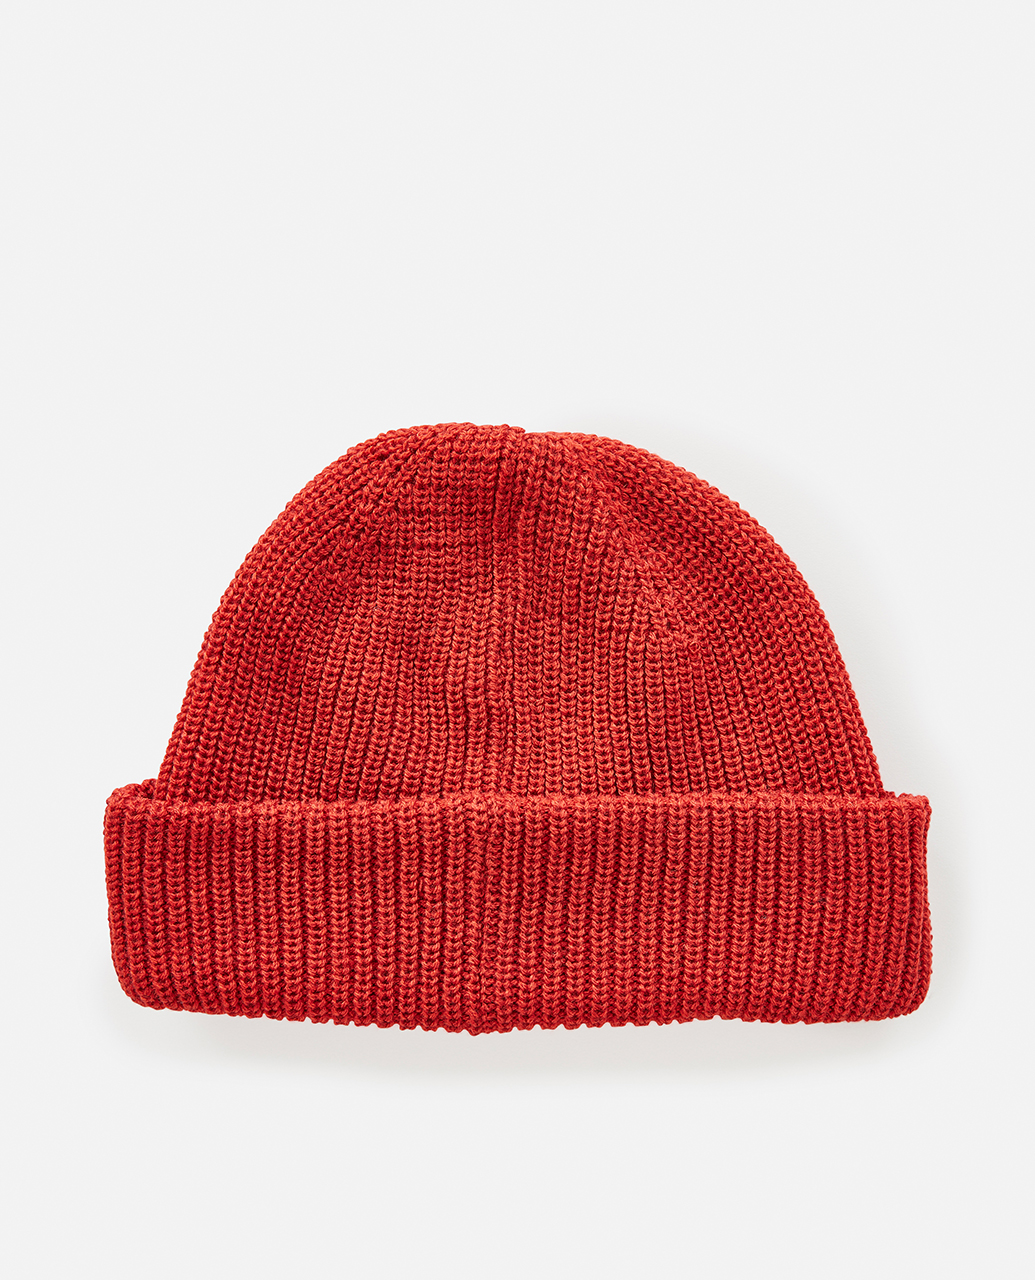 Men's Beanies | Rip Curl, Rusty, Volcom &more | Surf Clothing | Ozmosis